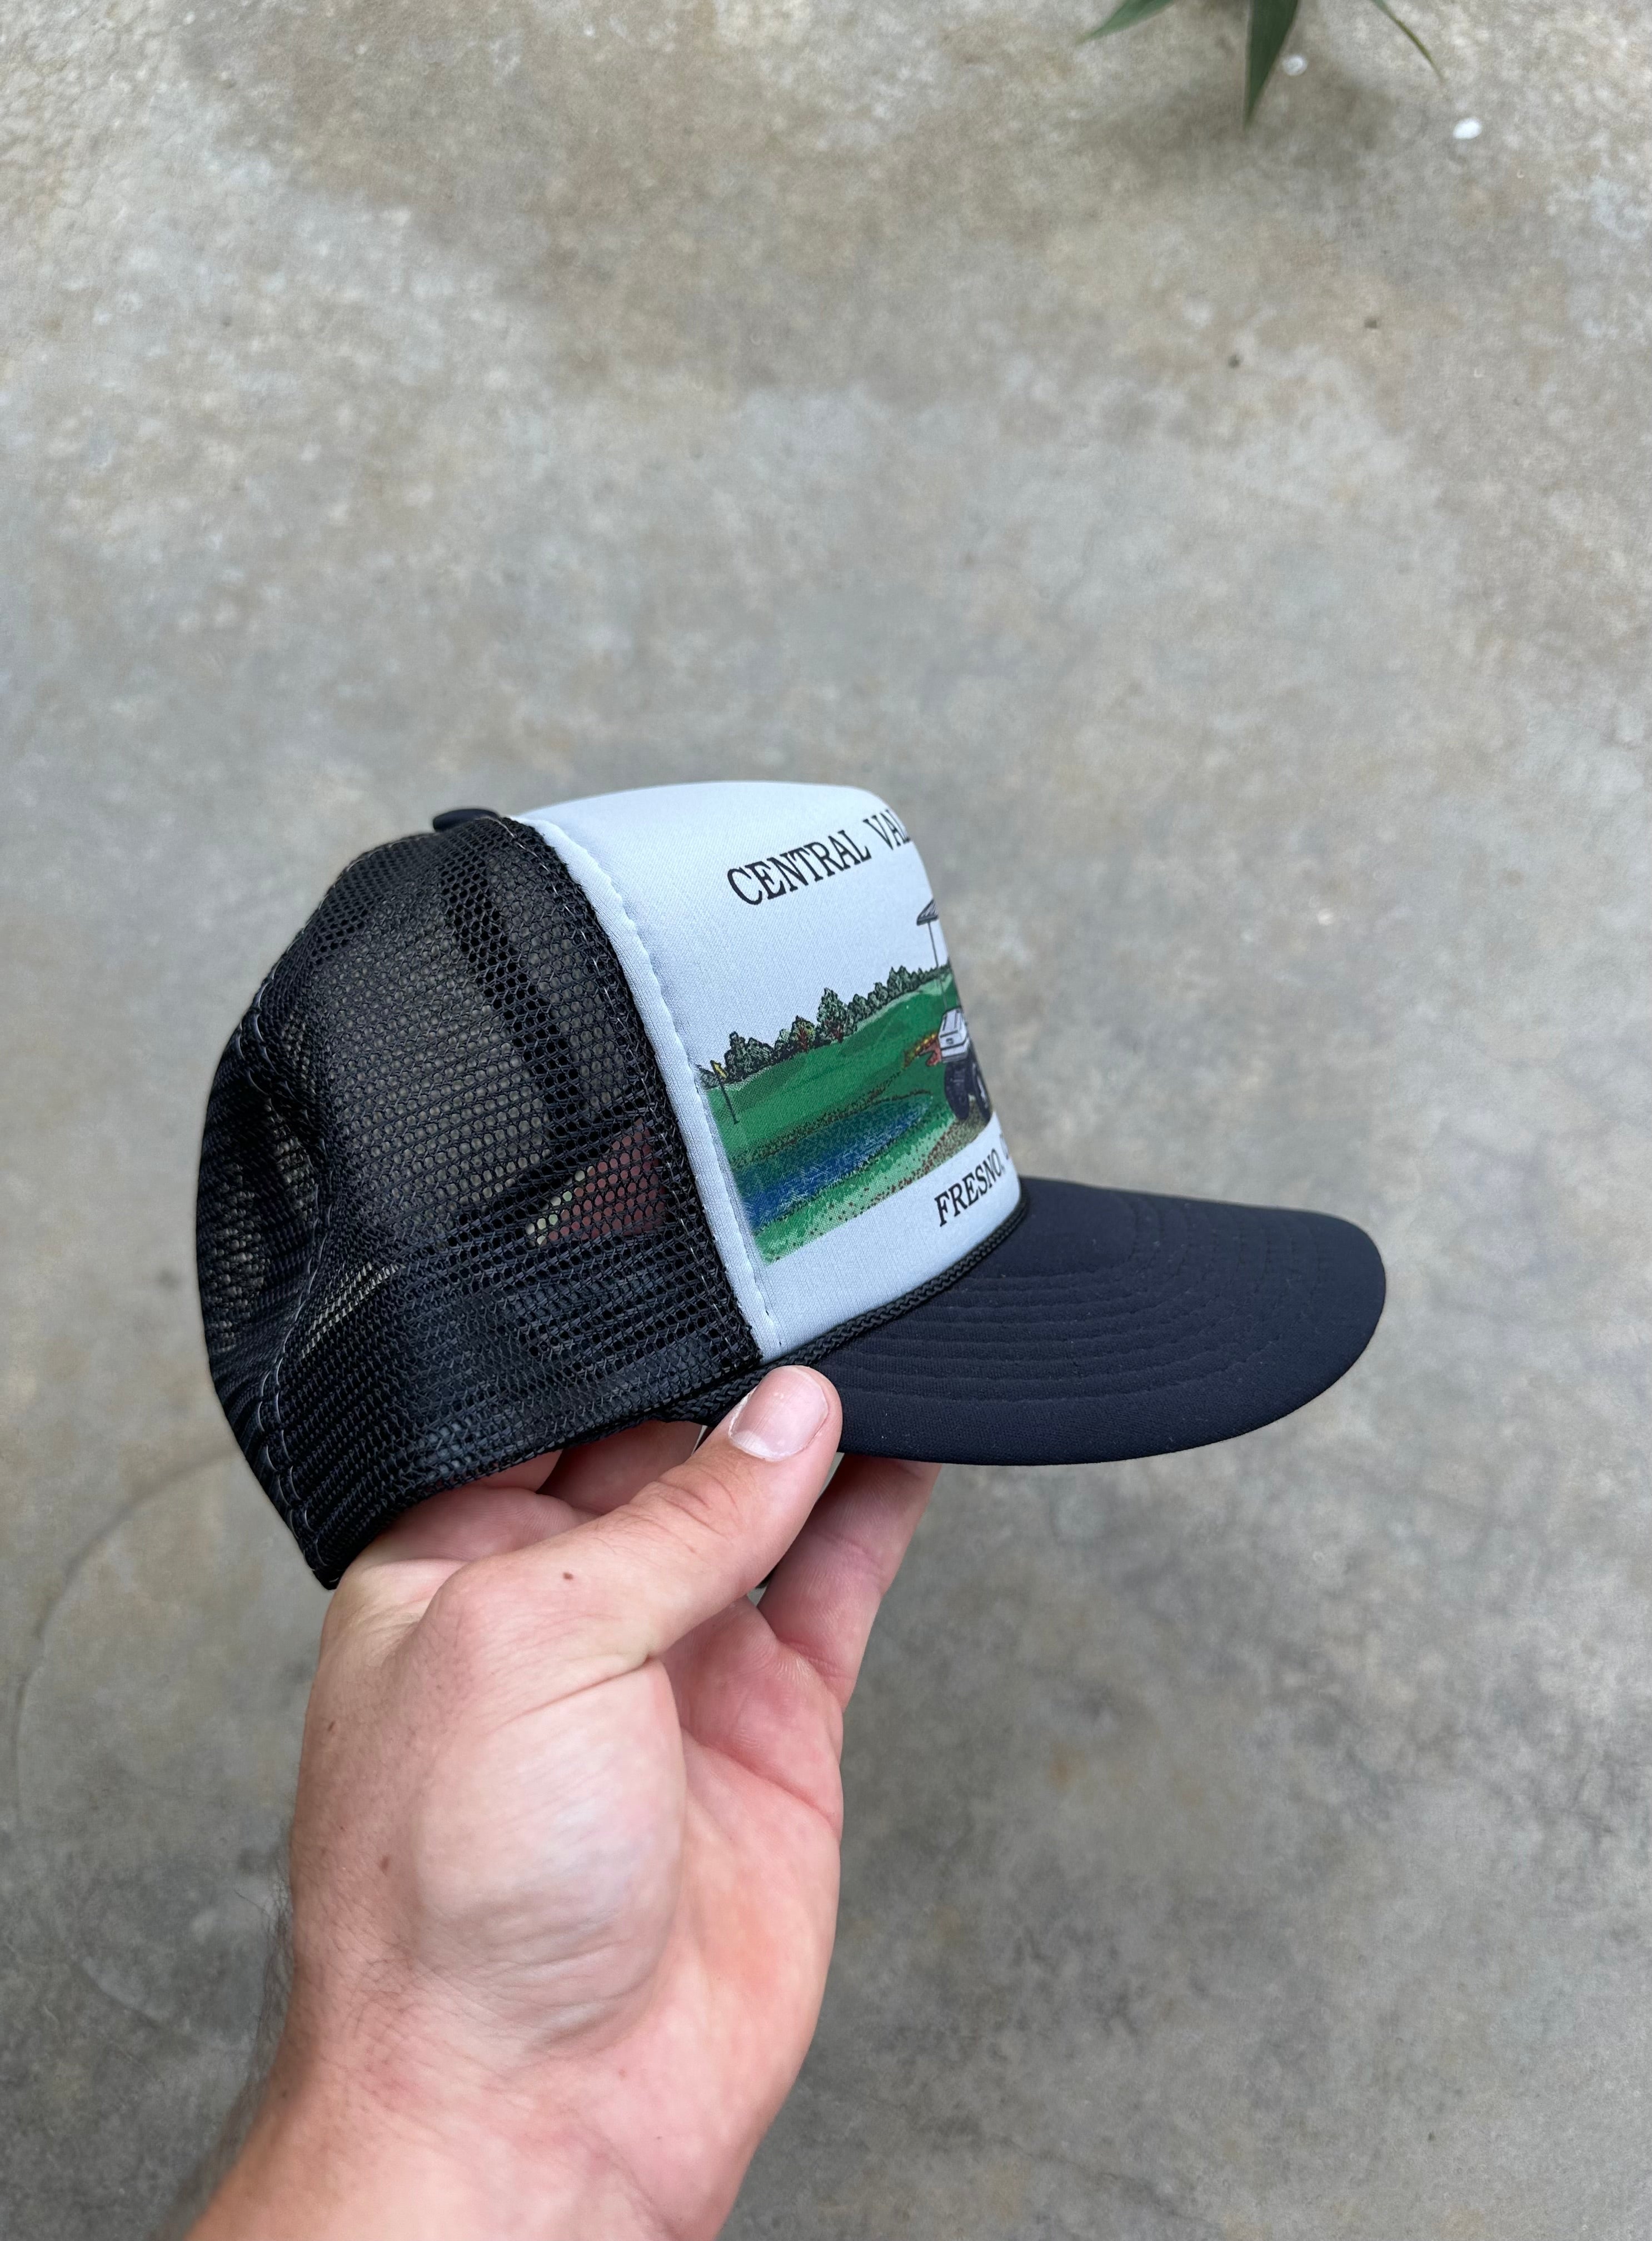 1980s Central Valley Golf Cars Trucker Hat